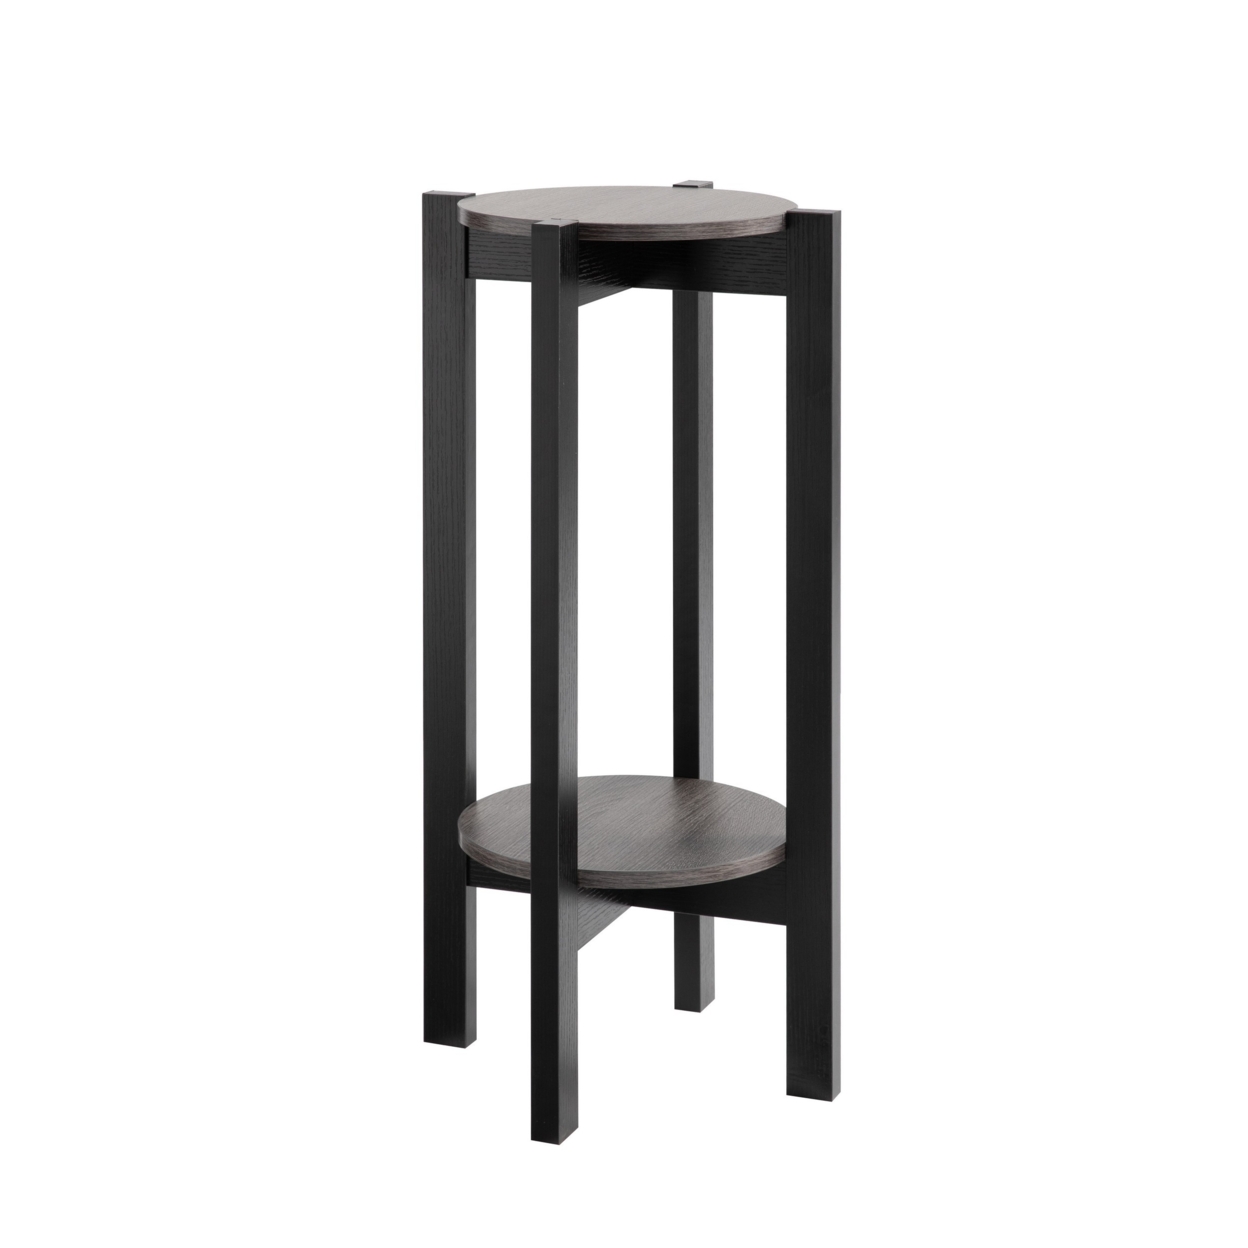 32 Inch Modern Plant Stand With Two Round Shelves, Distressed Gray, Black- Saltoro Sherpi